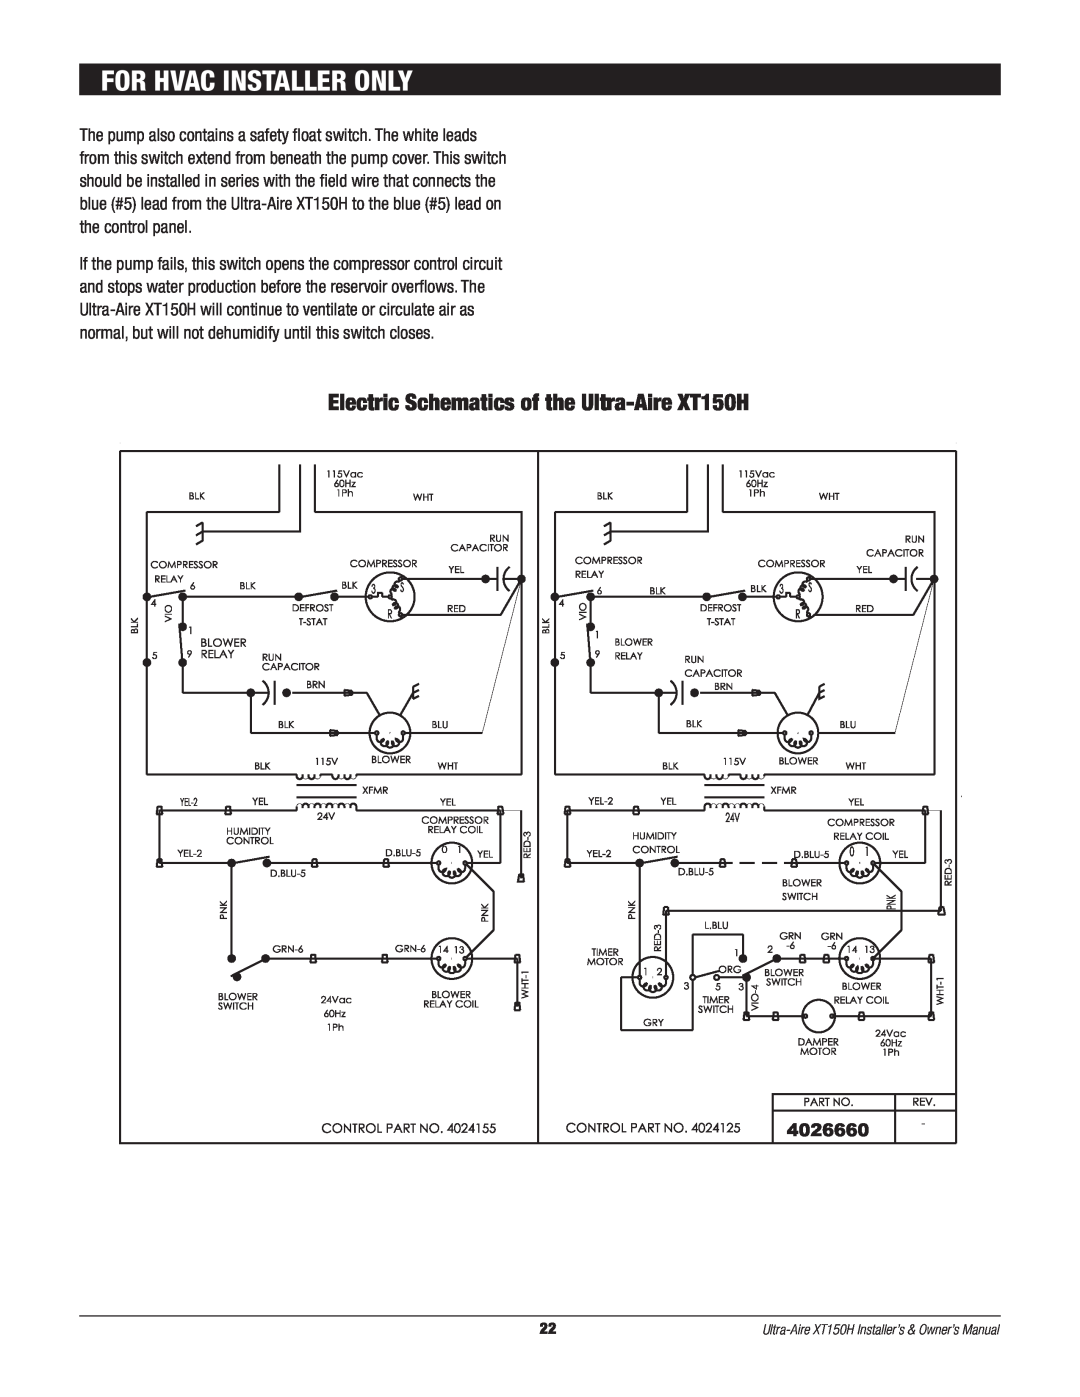 Therma-Stor Products Group owner manual Electric Schematics of the Ultra-AireXT150H, For Hvac Installer Only 